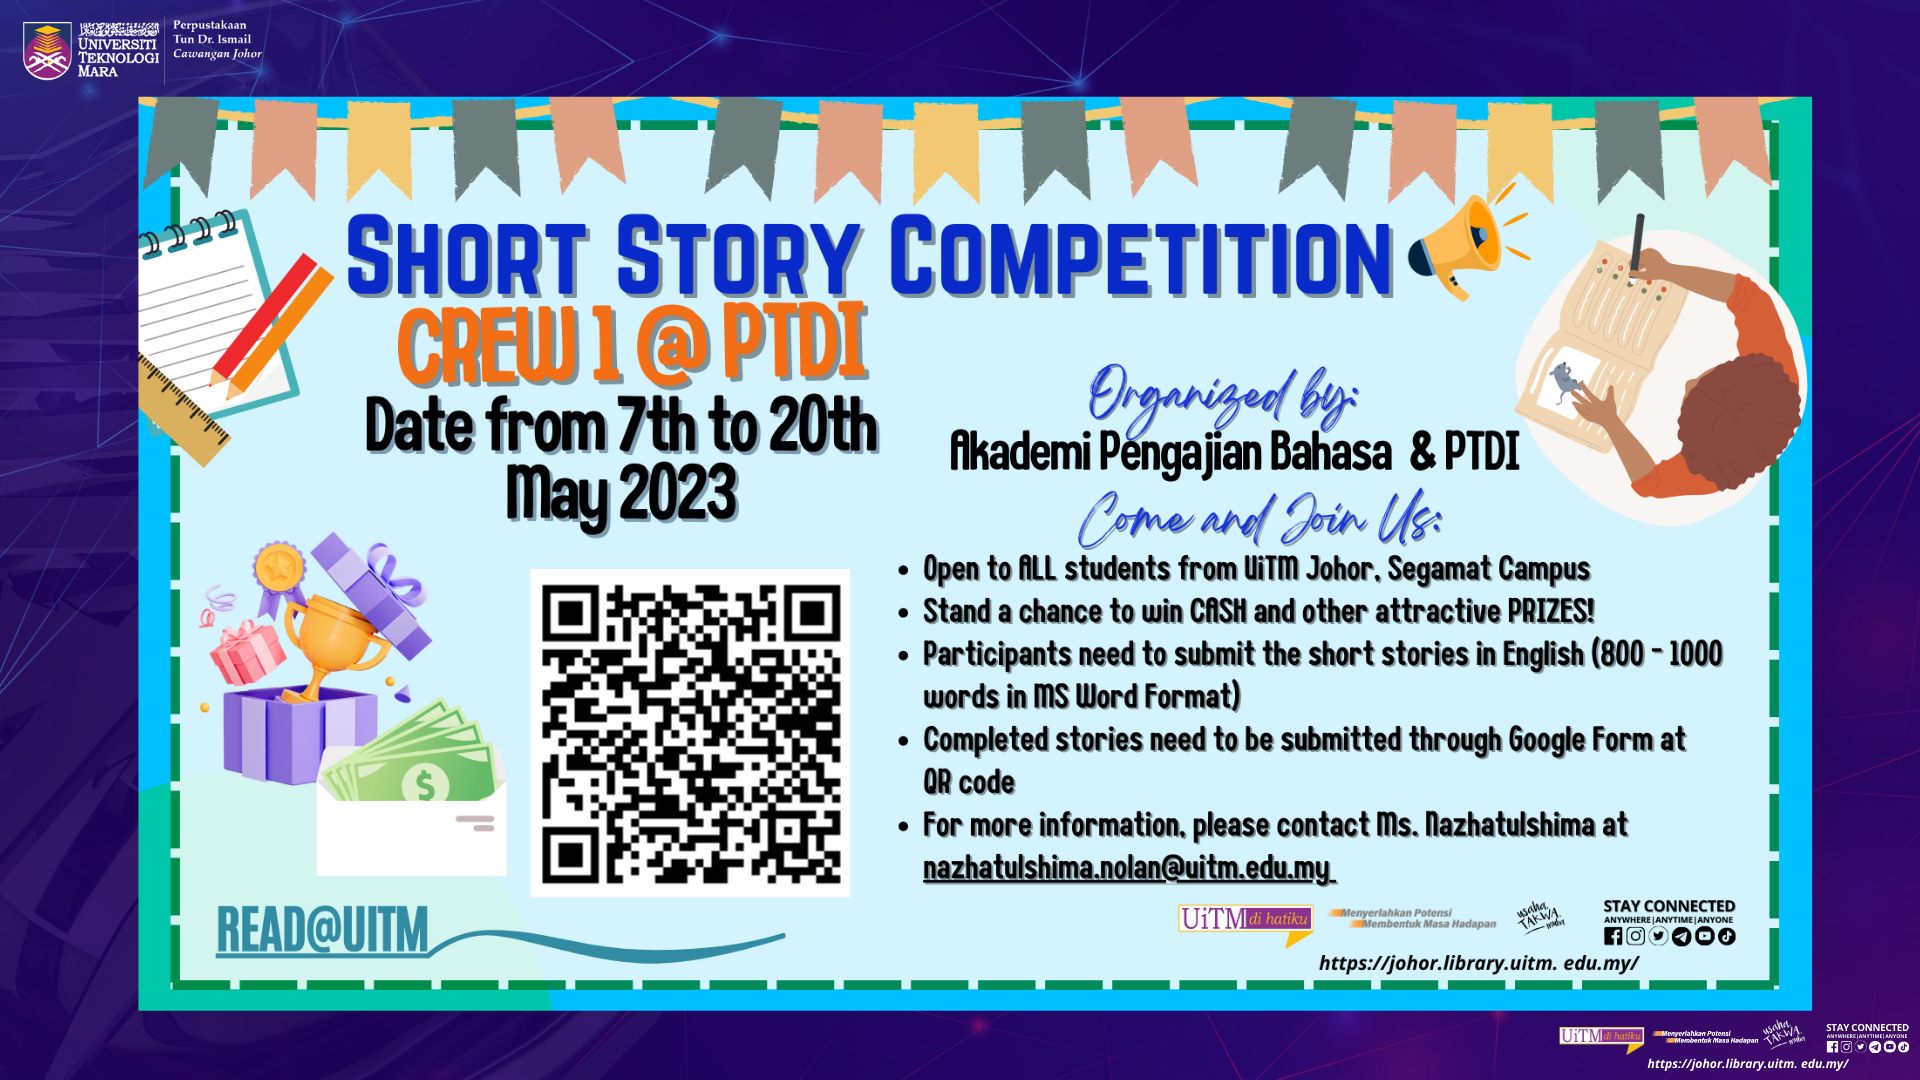 SHORT STORY COMPETITION, CREW 1 @PTDI